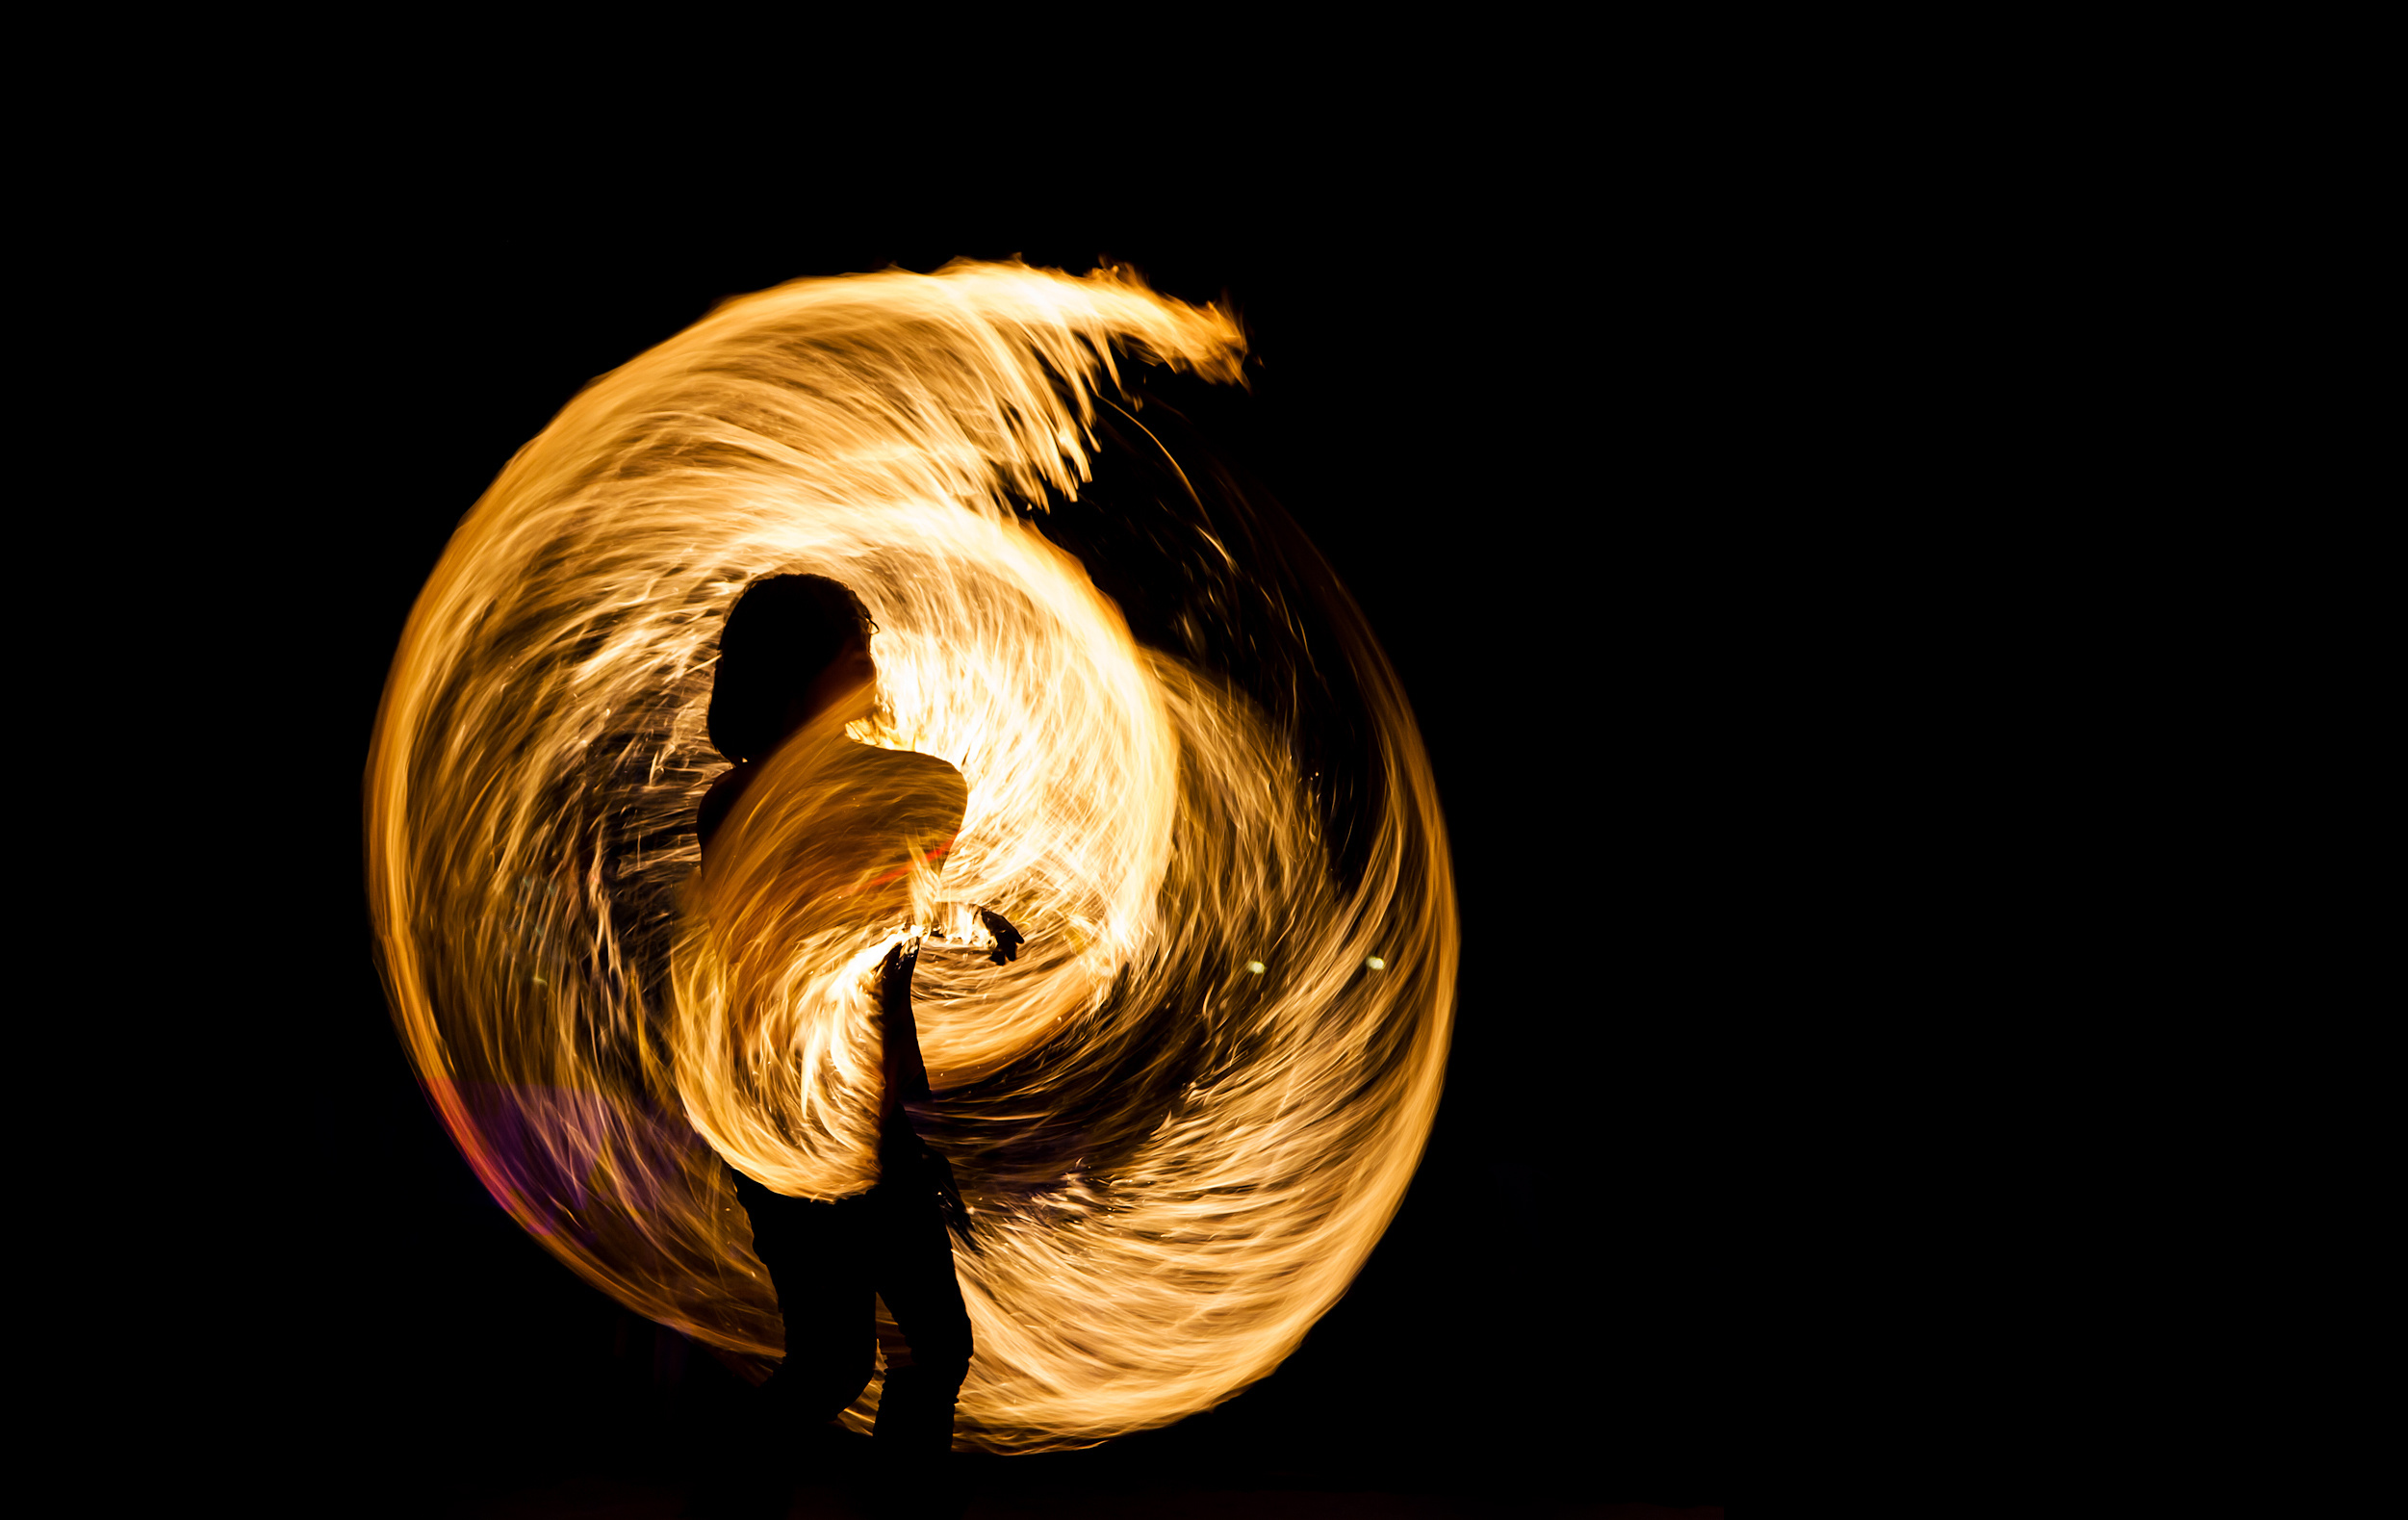 Juggling: Kevlar para-aramid torches used by an extreme juggler, Performance in the night. 2510x1580 HD Wallpaper.